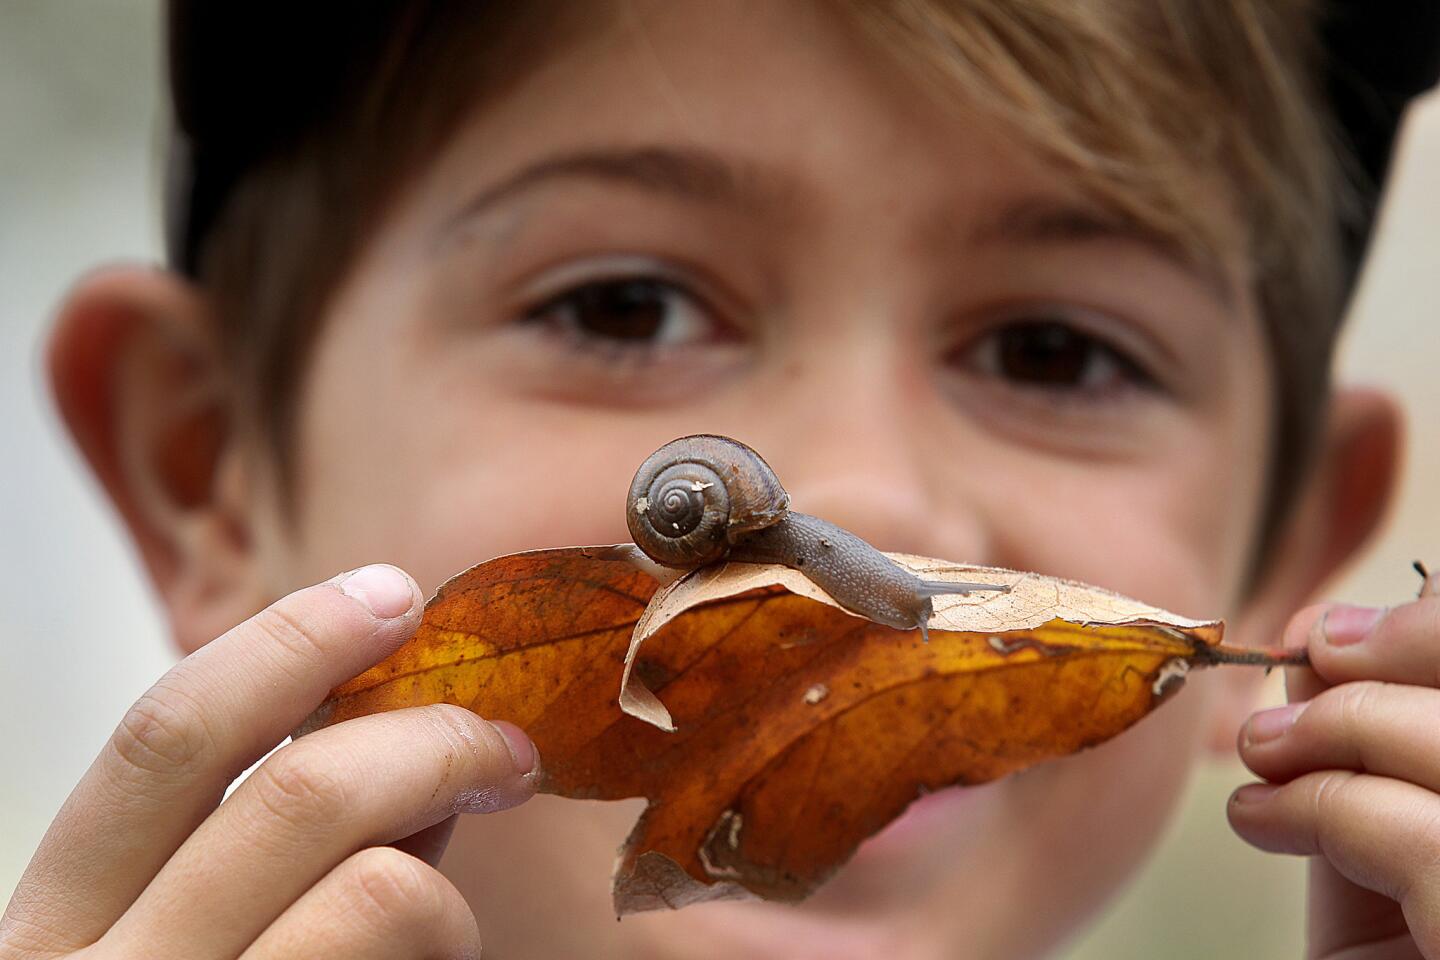 Logan Joanis, 8, with a snail he found in Eaton Canyon, just north of Pasadena. He and other citizen scientists took part in a project organized by the Natural History Museum of Los Angeles County to catalog the diversity of land snails and slugs in Southern California.